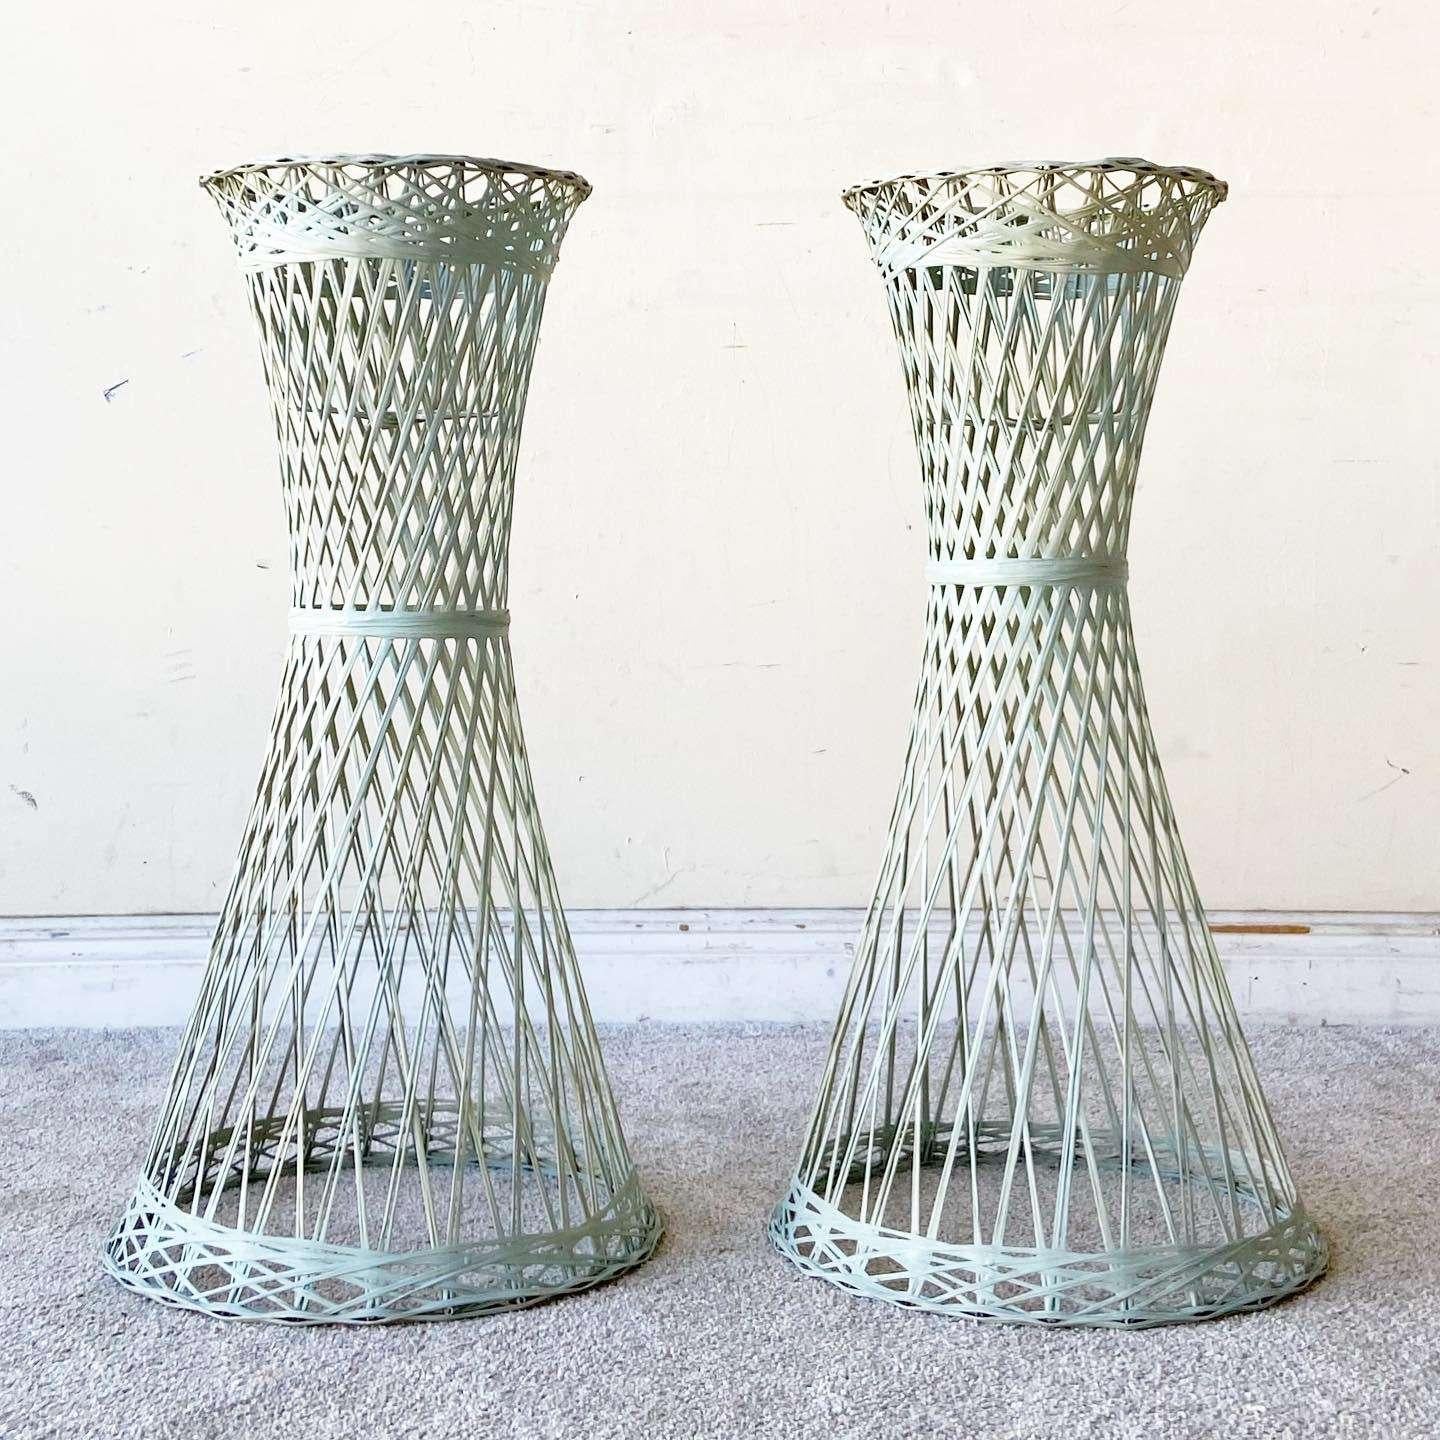 Excellent pair of mid century modern Russell Woodard spun fiber glass plant stands. Displays a tantalizing hourglass shape with a minty green finish.
